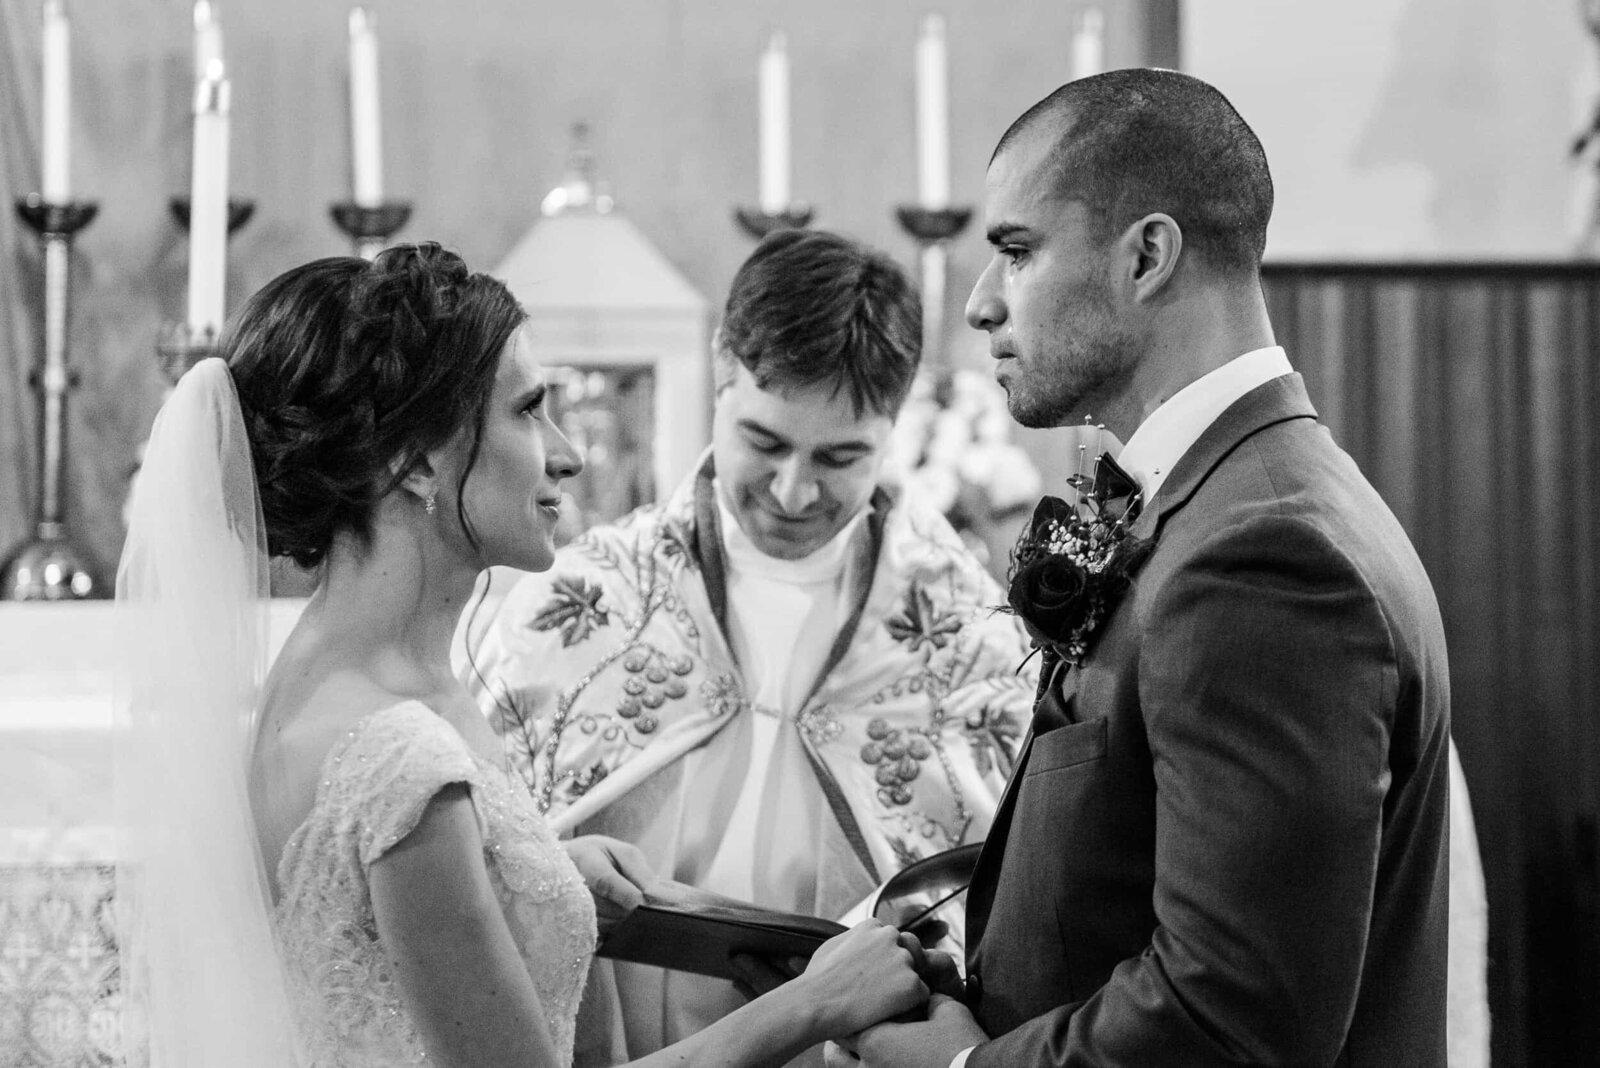 A groom sheds a tear during his  vows at a Catholic wedding in Northern Virginia